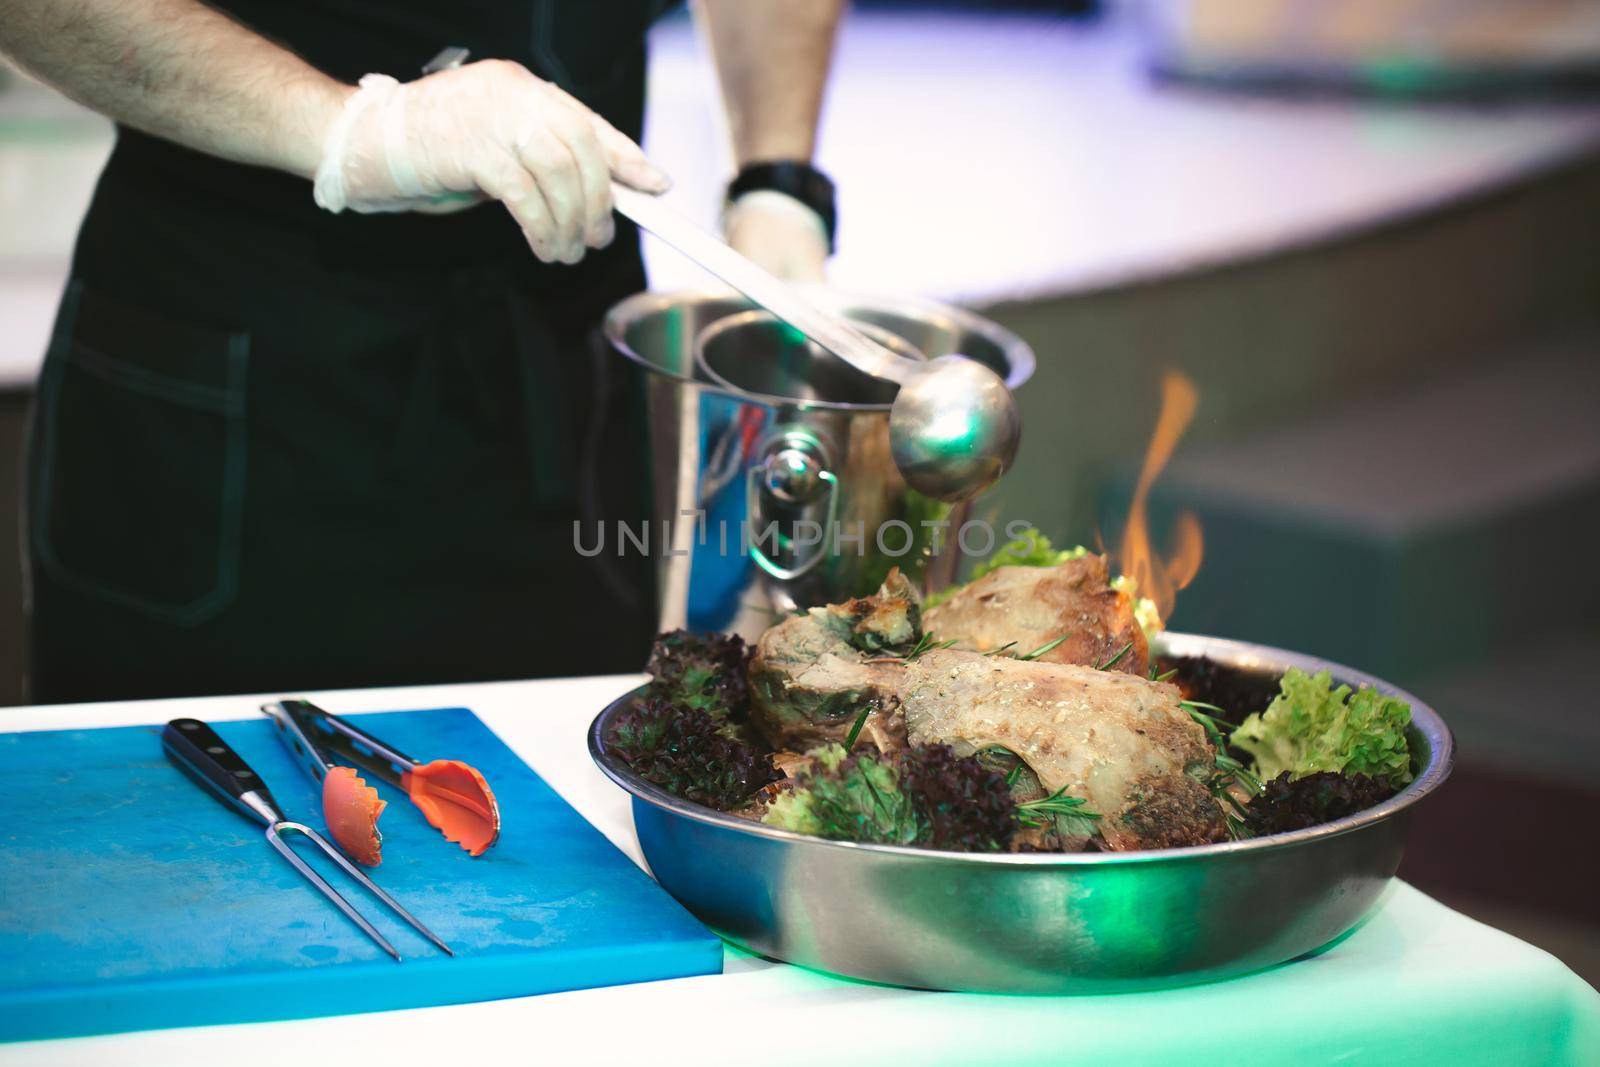 The chef's hands pour broth over the meat in the process of cooking flambe by StudioPeace